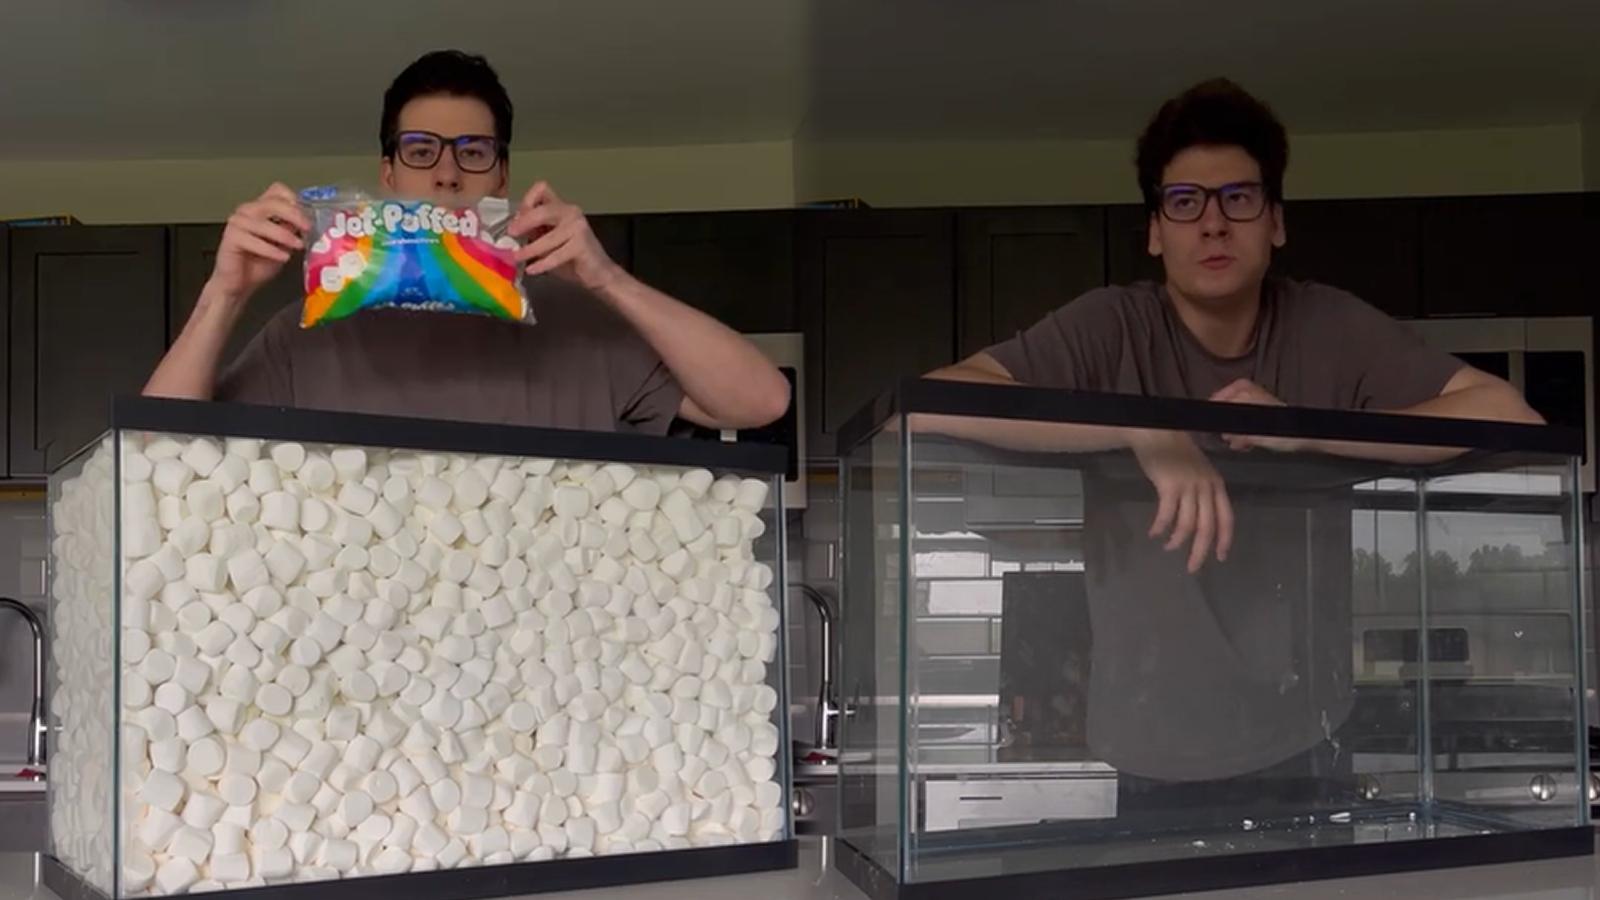 TikToker Wally before and after eating 100 liters of marshmallow